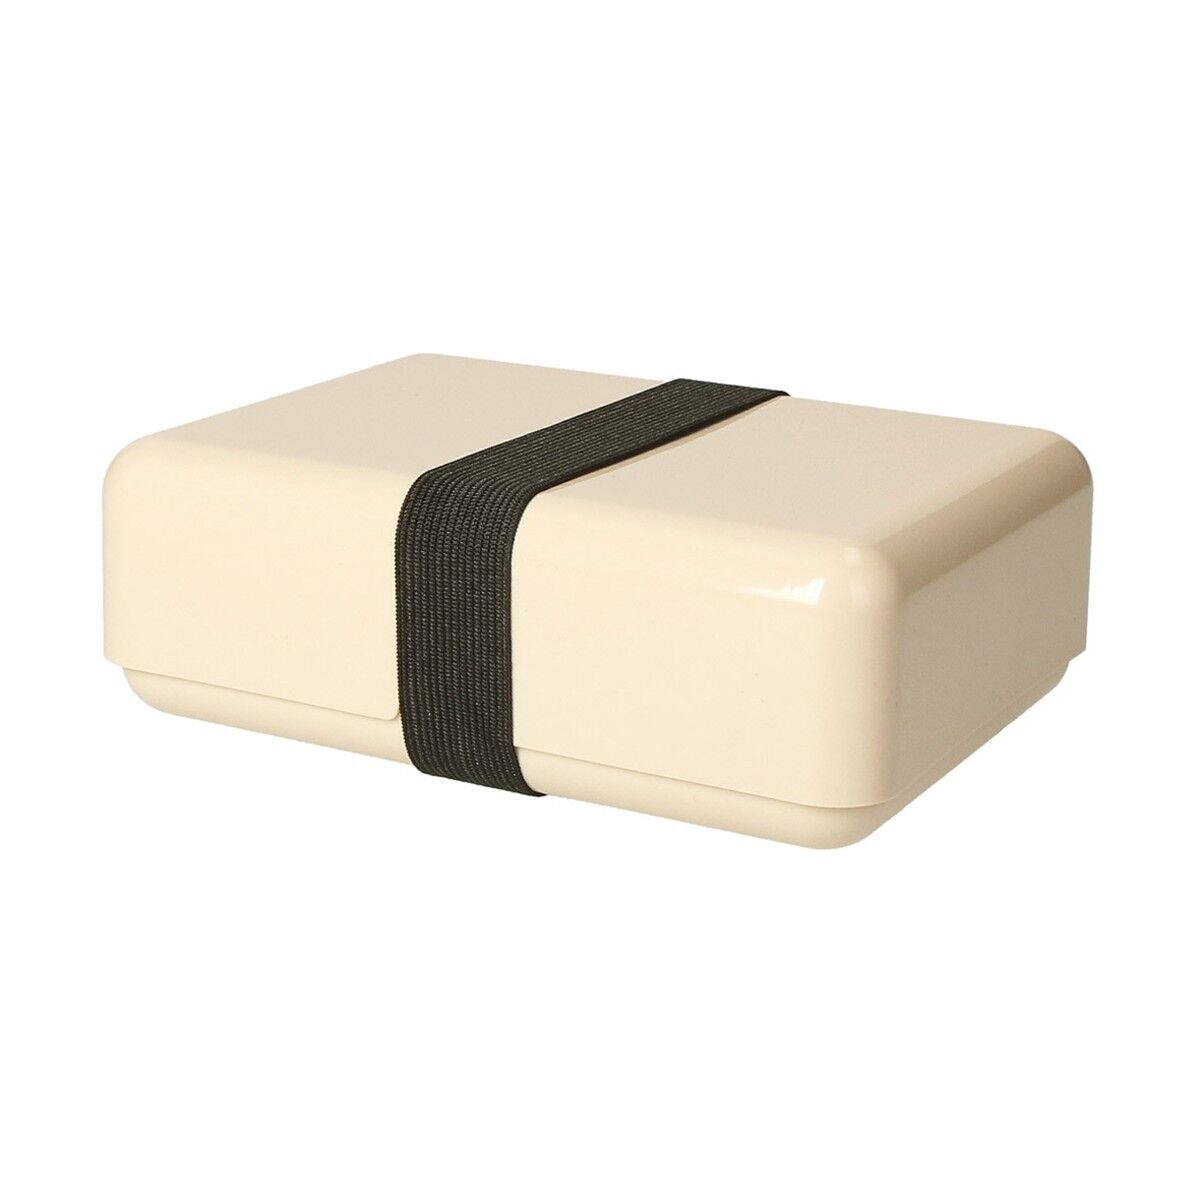 Bioplastic Natural Lunch Box in Apricot with black strap